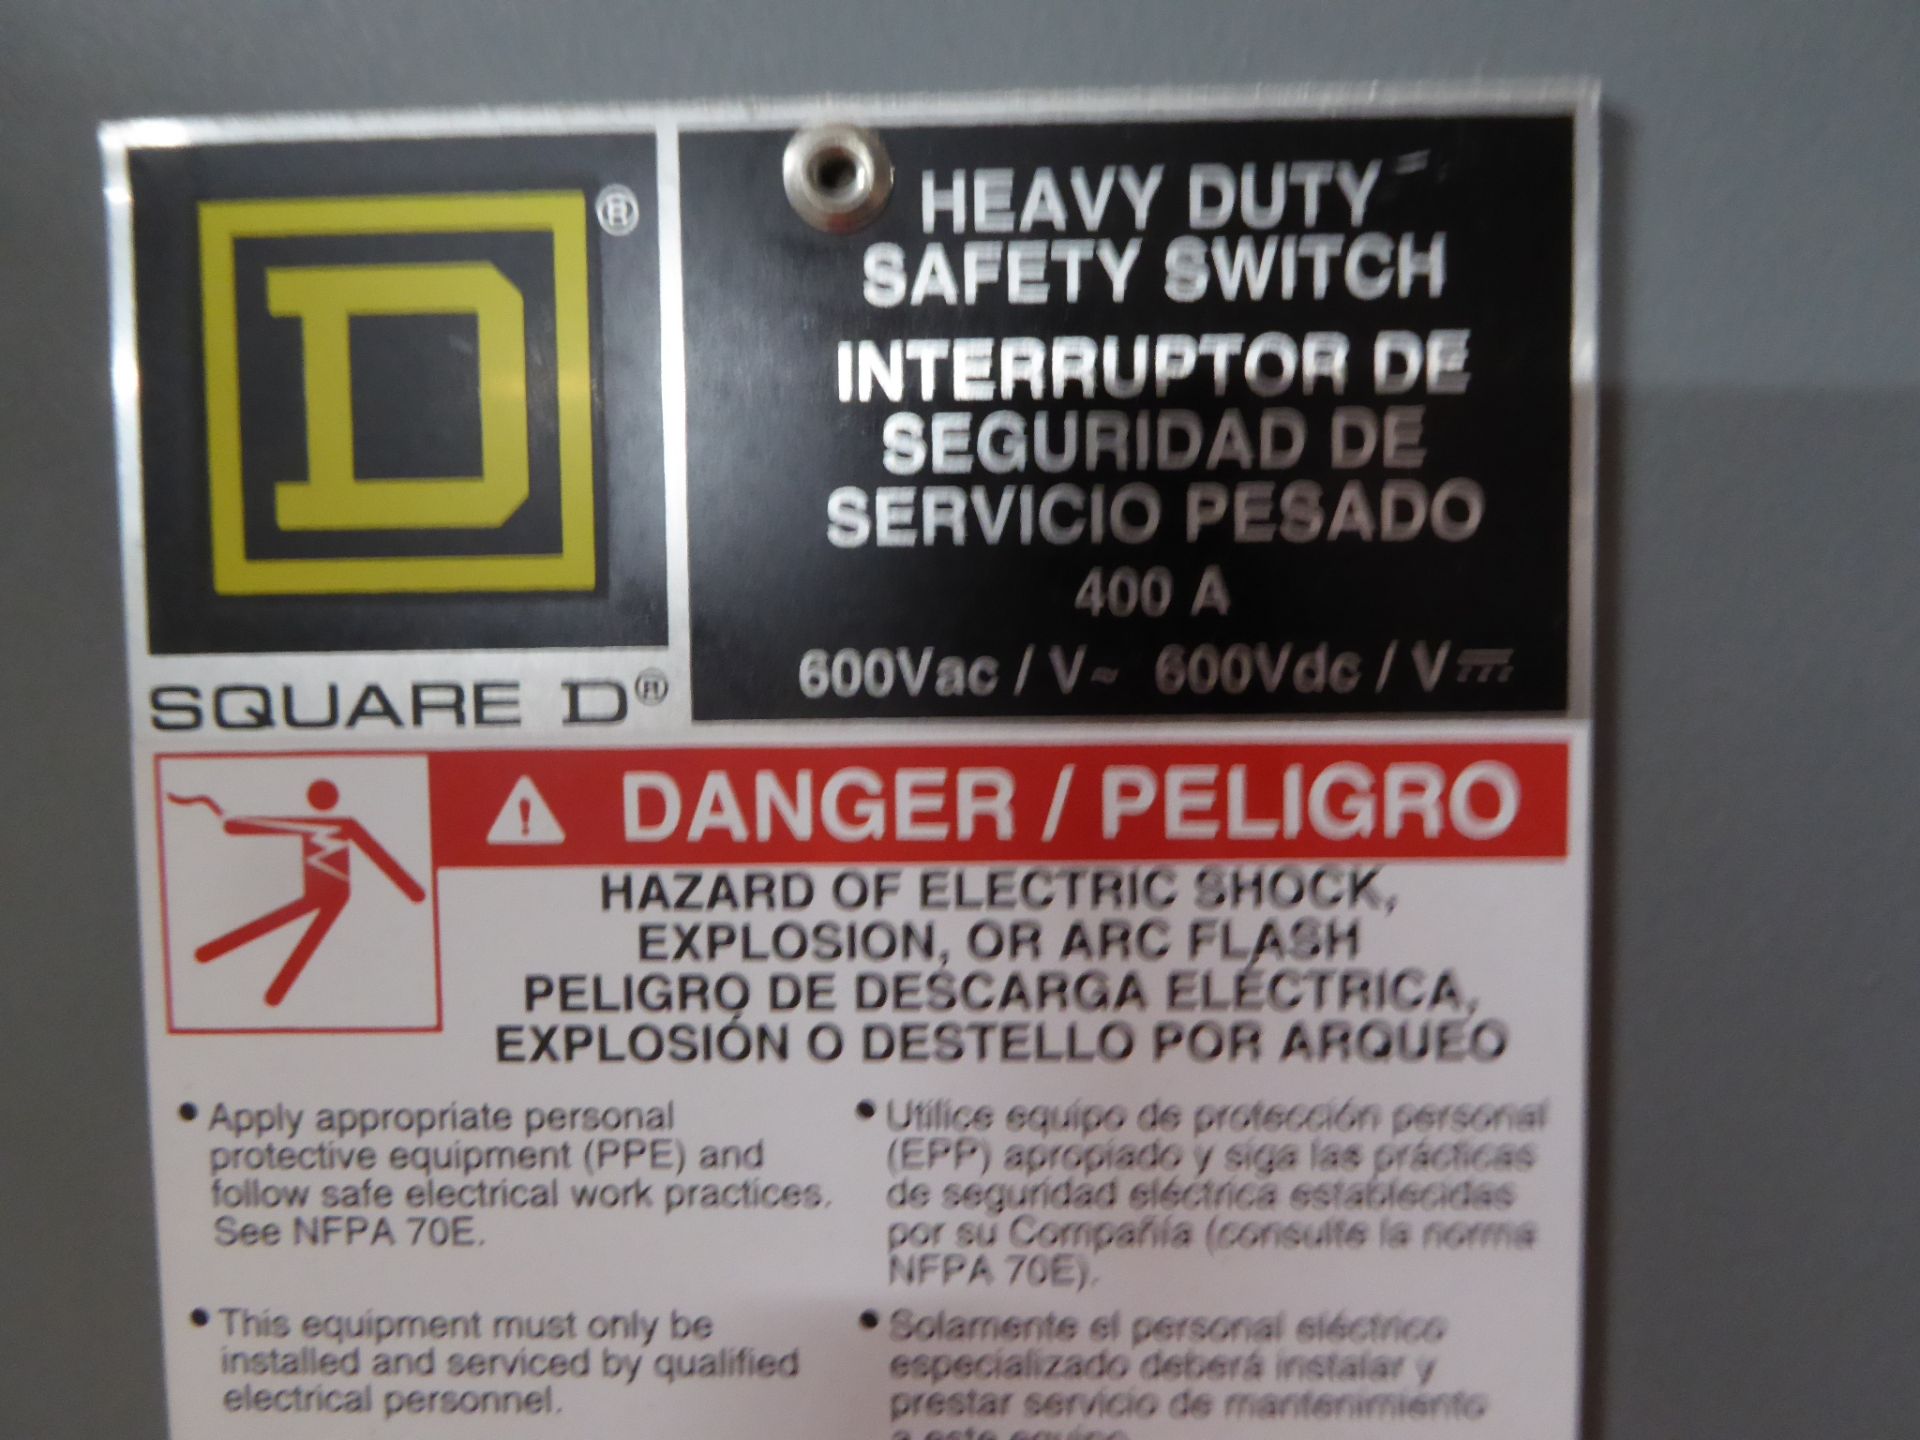 Square D Heavy Duty Safety Switch - Image 3 of 7